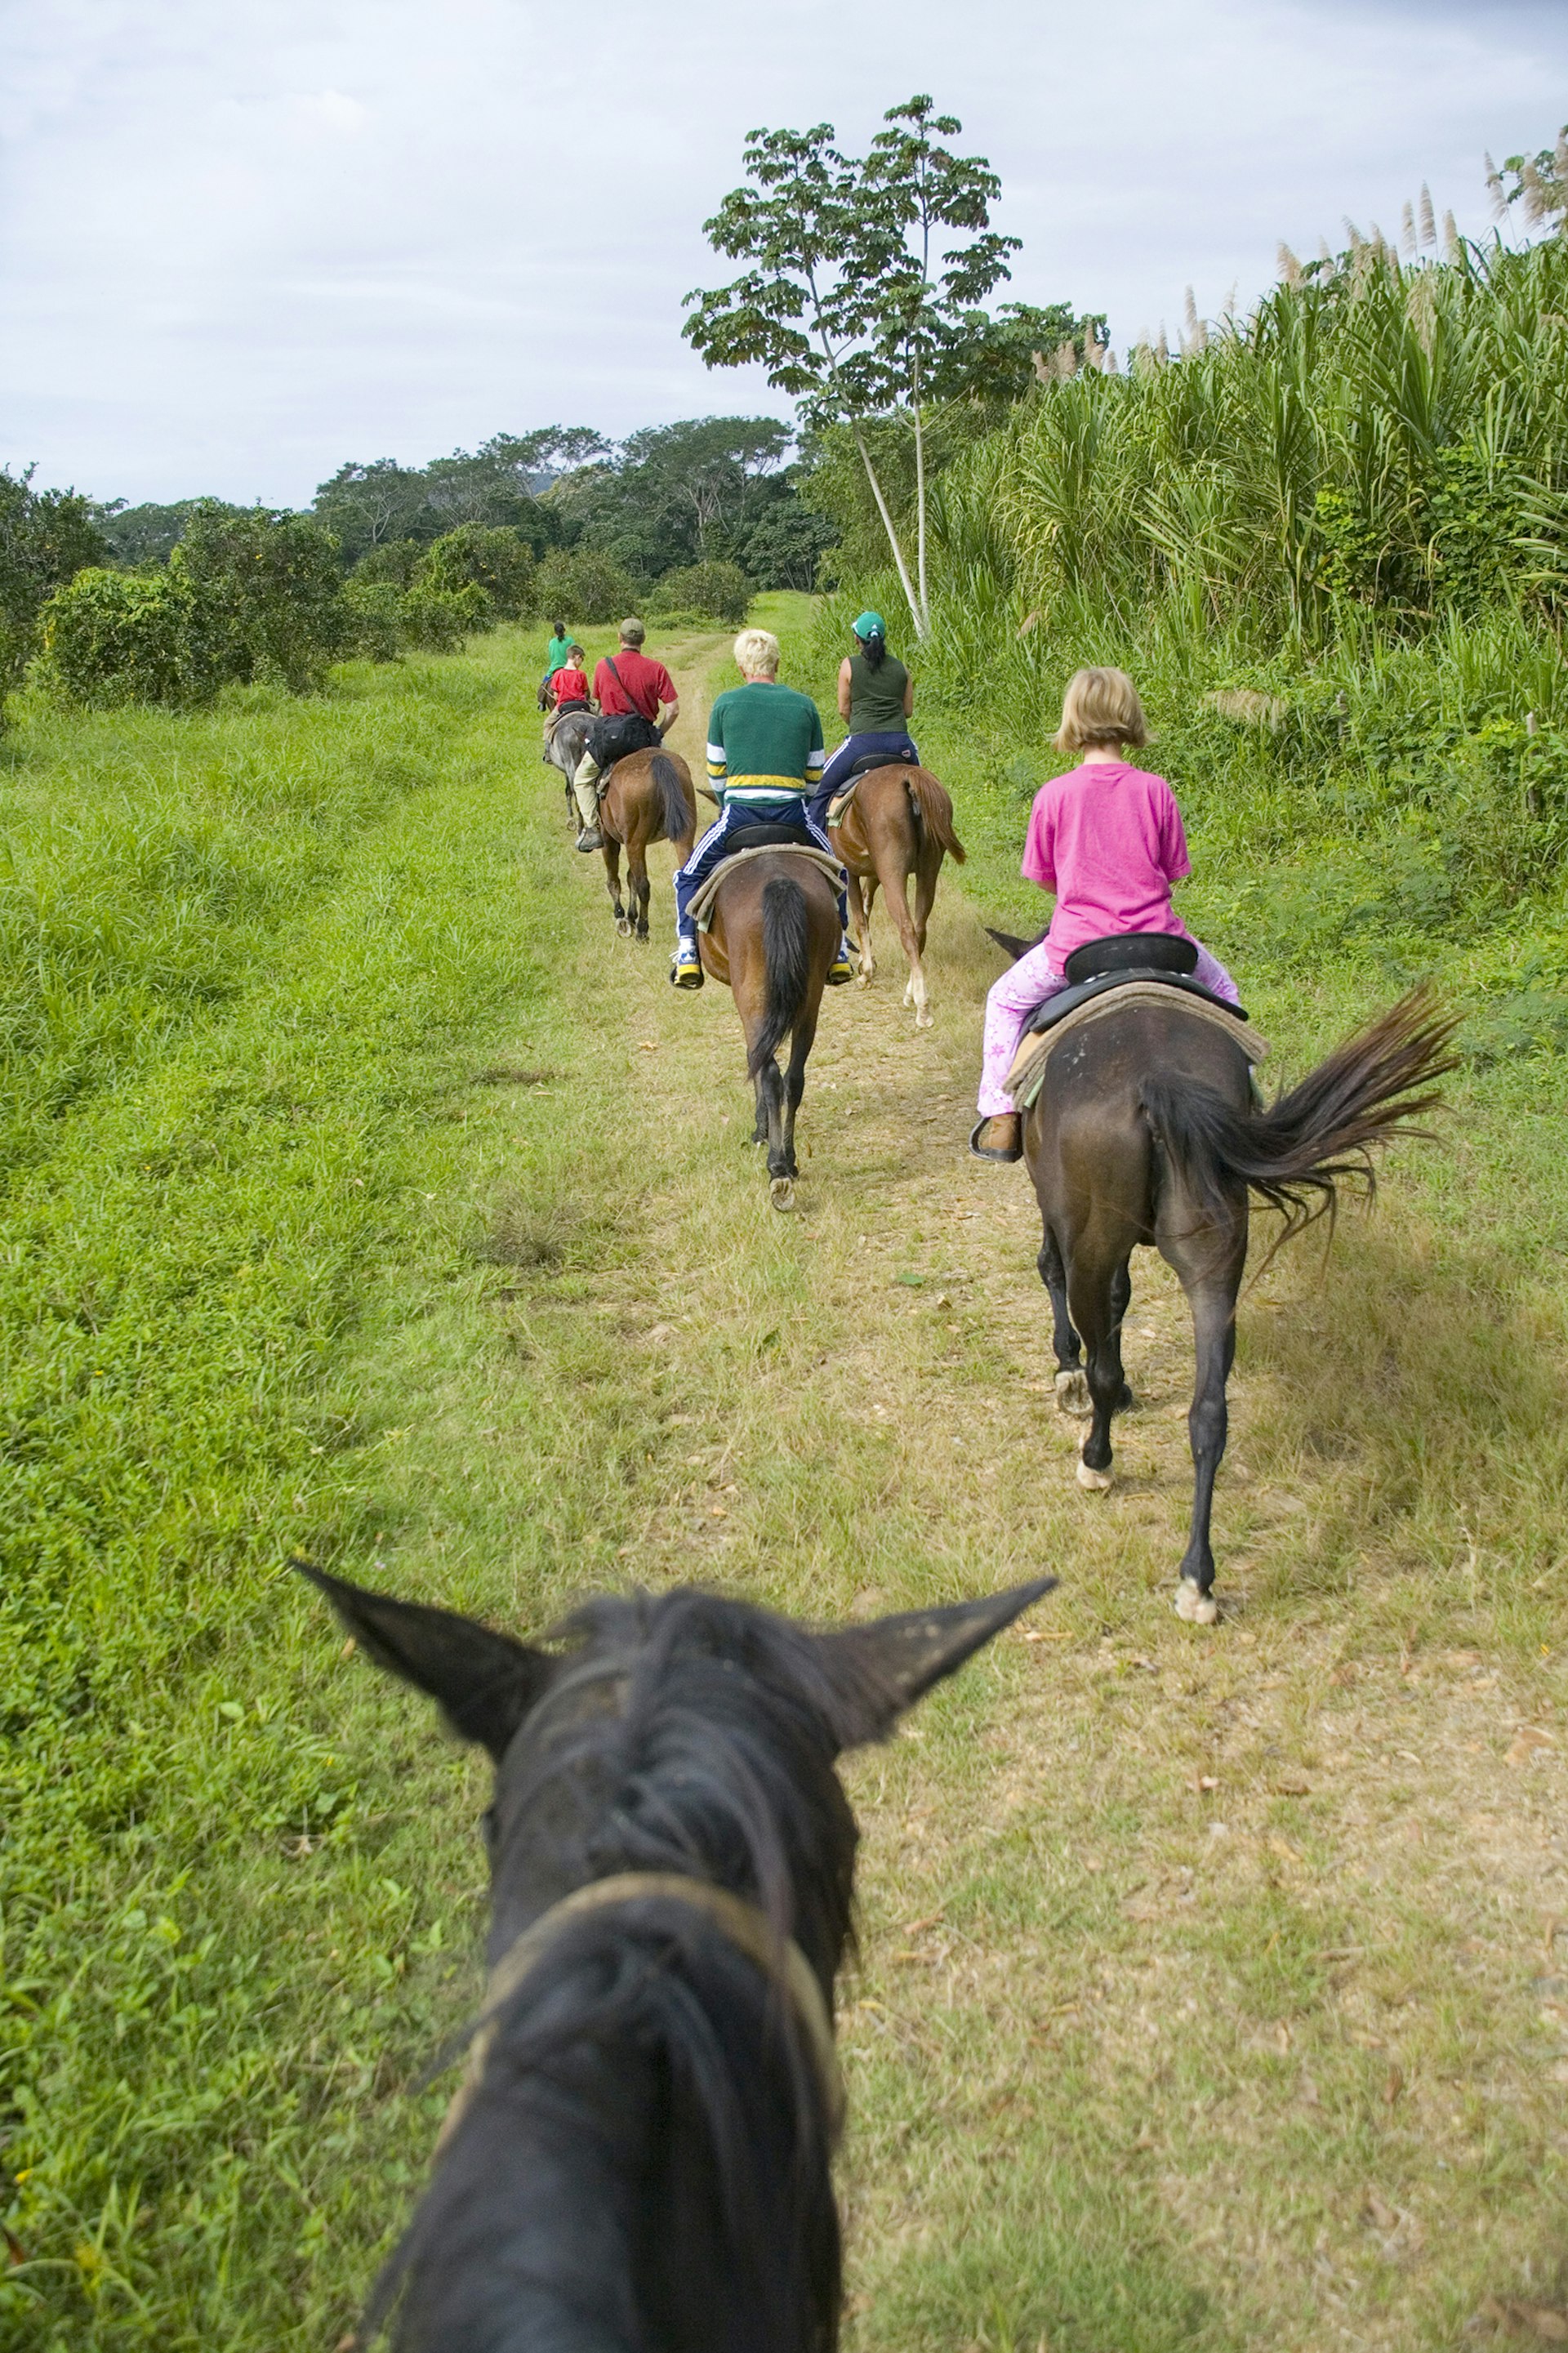 Features - Belize, people riding horses into jungle, rear view